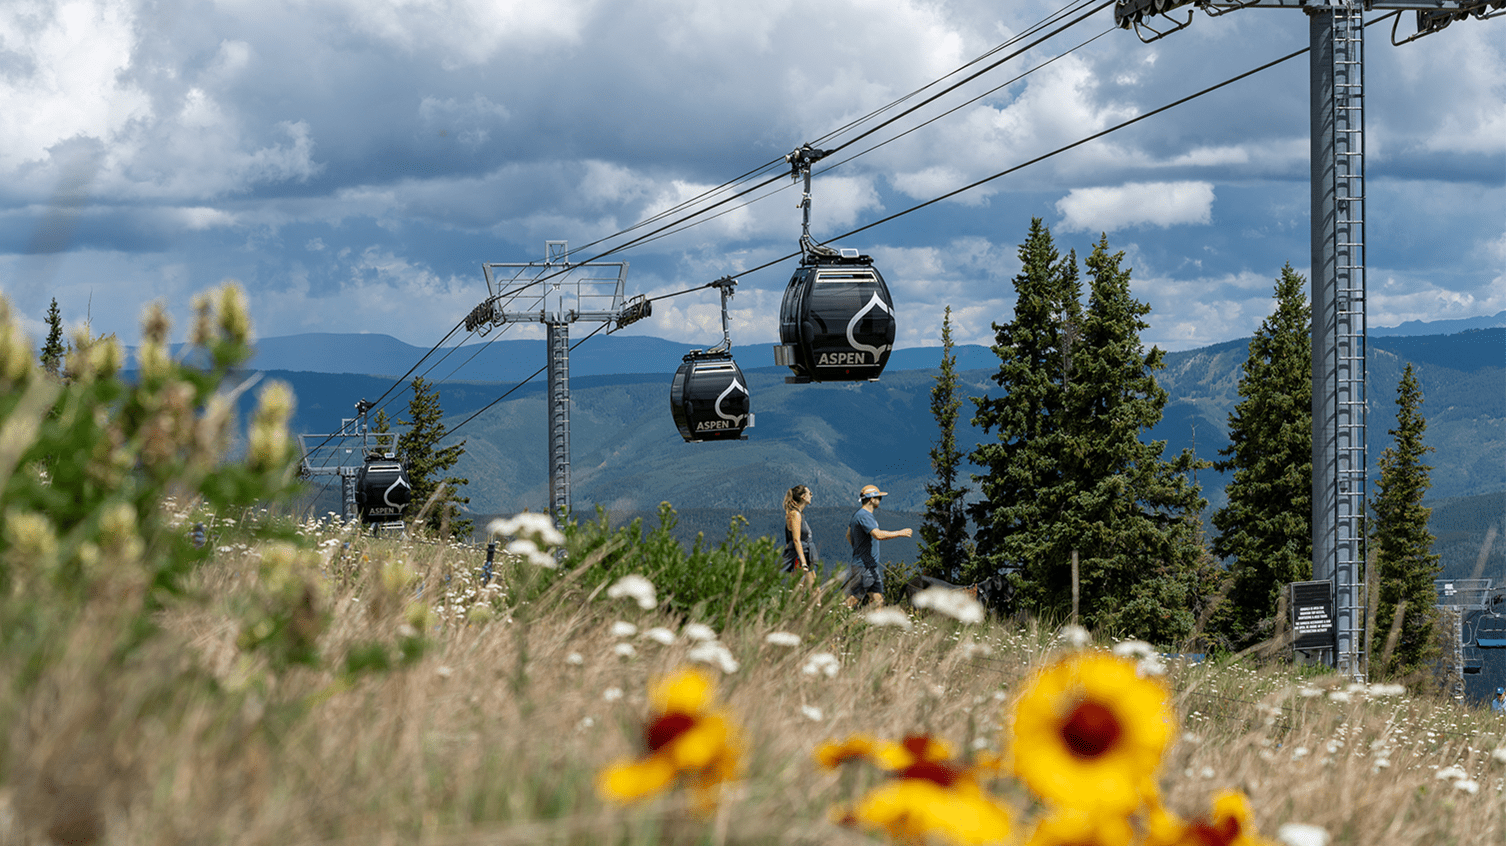 Silver Queen Gondola in the summer, guests hiking underneath, and orange flowers in foreground 